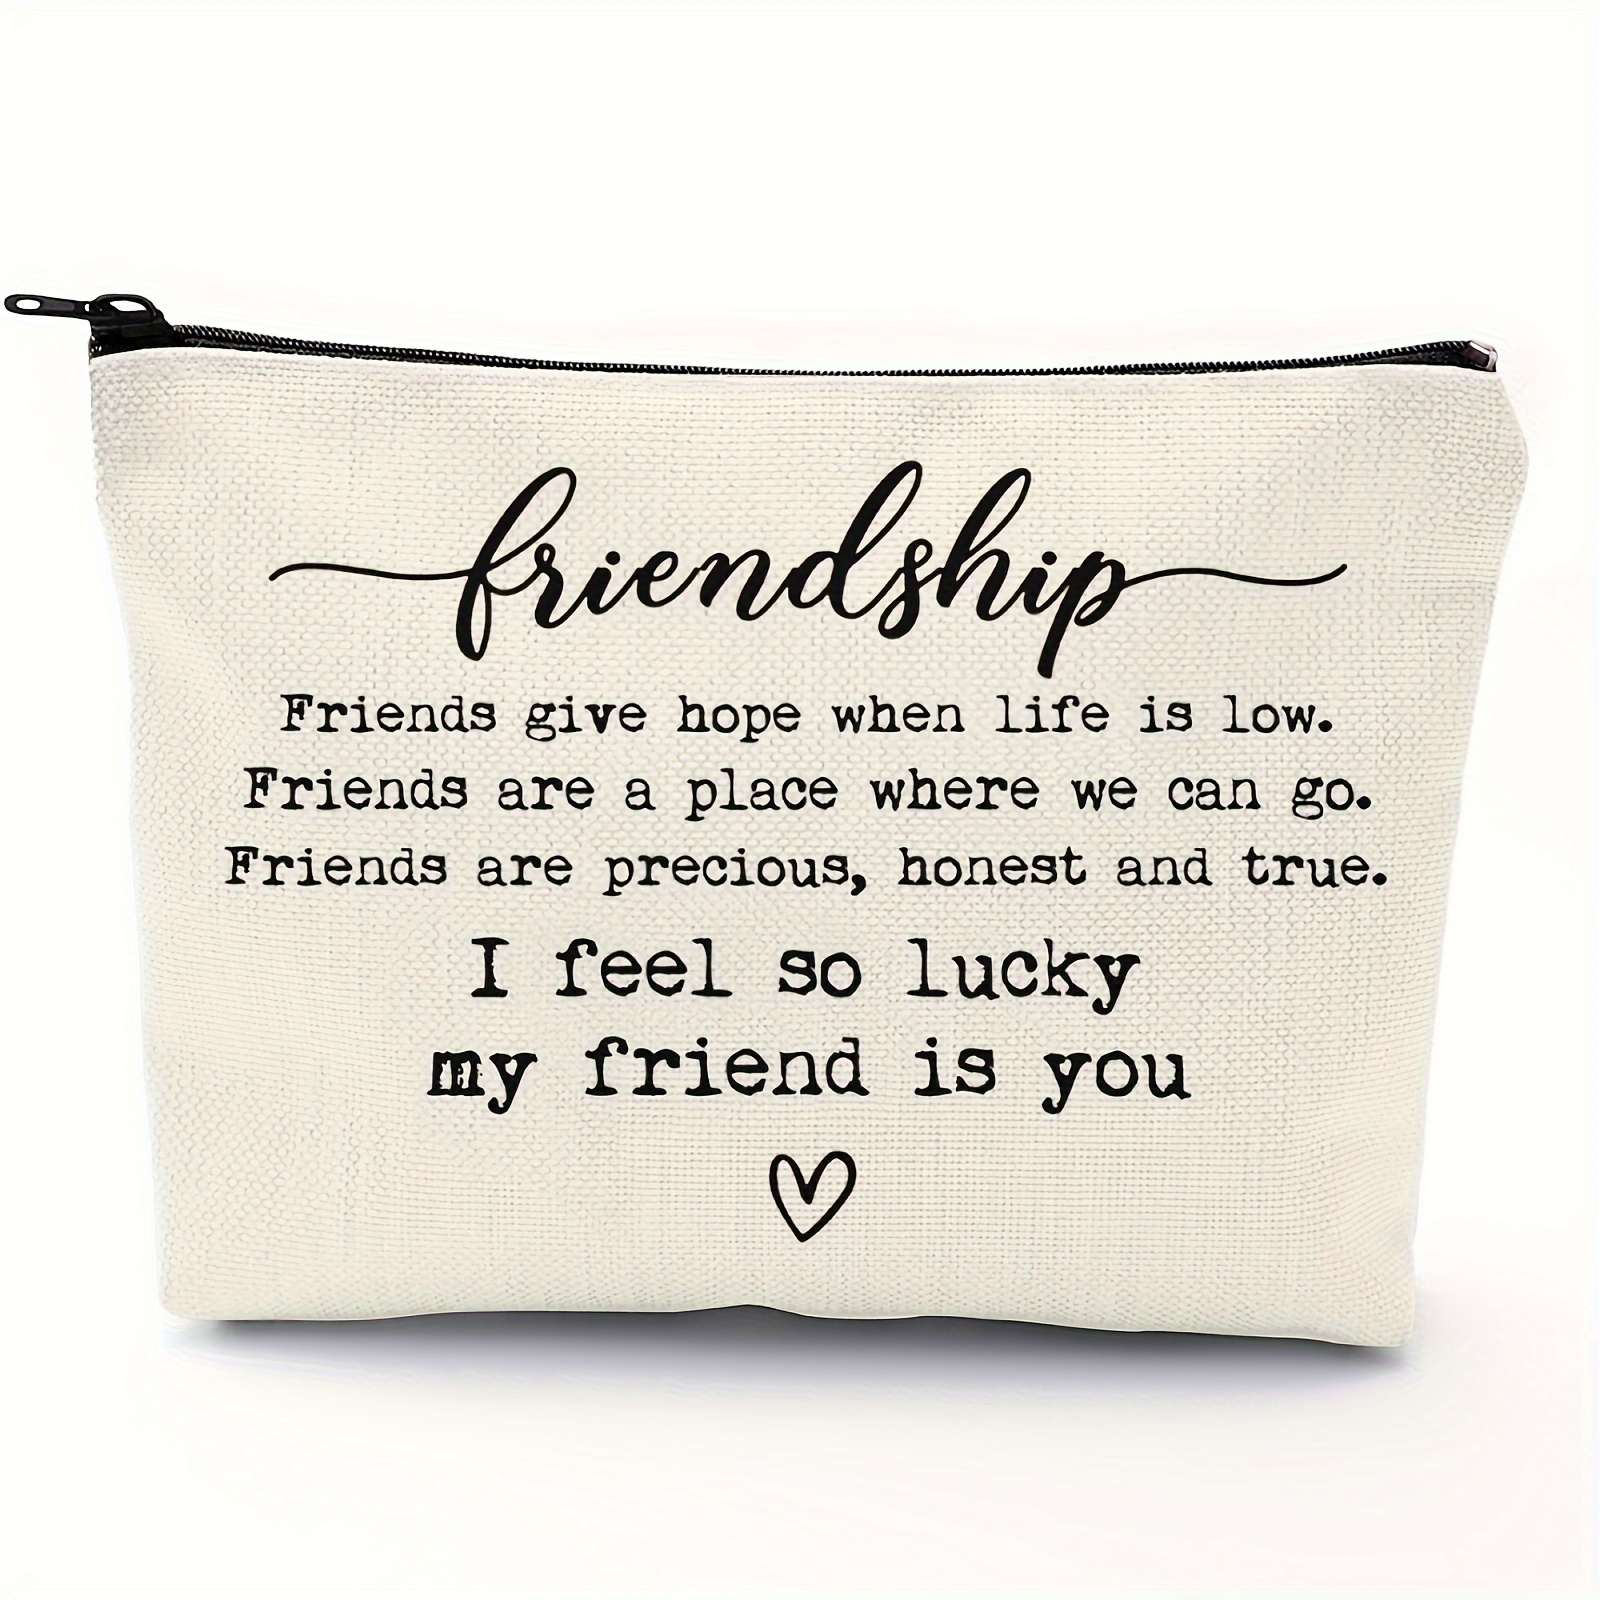 

Friend Gift, Gift For Friend, Friendship Gift, Best Friend Gift, Makeup Case, Cosmetic Bag, Tote Bag, Bestie Present, Thank You Friend Gift